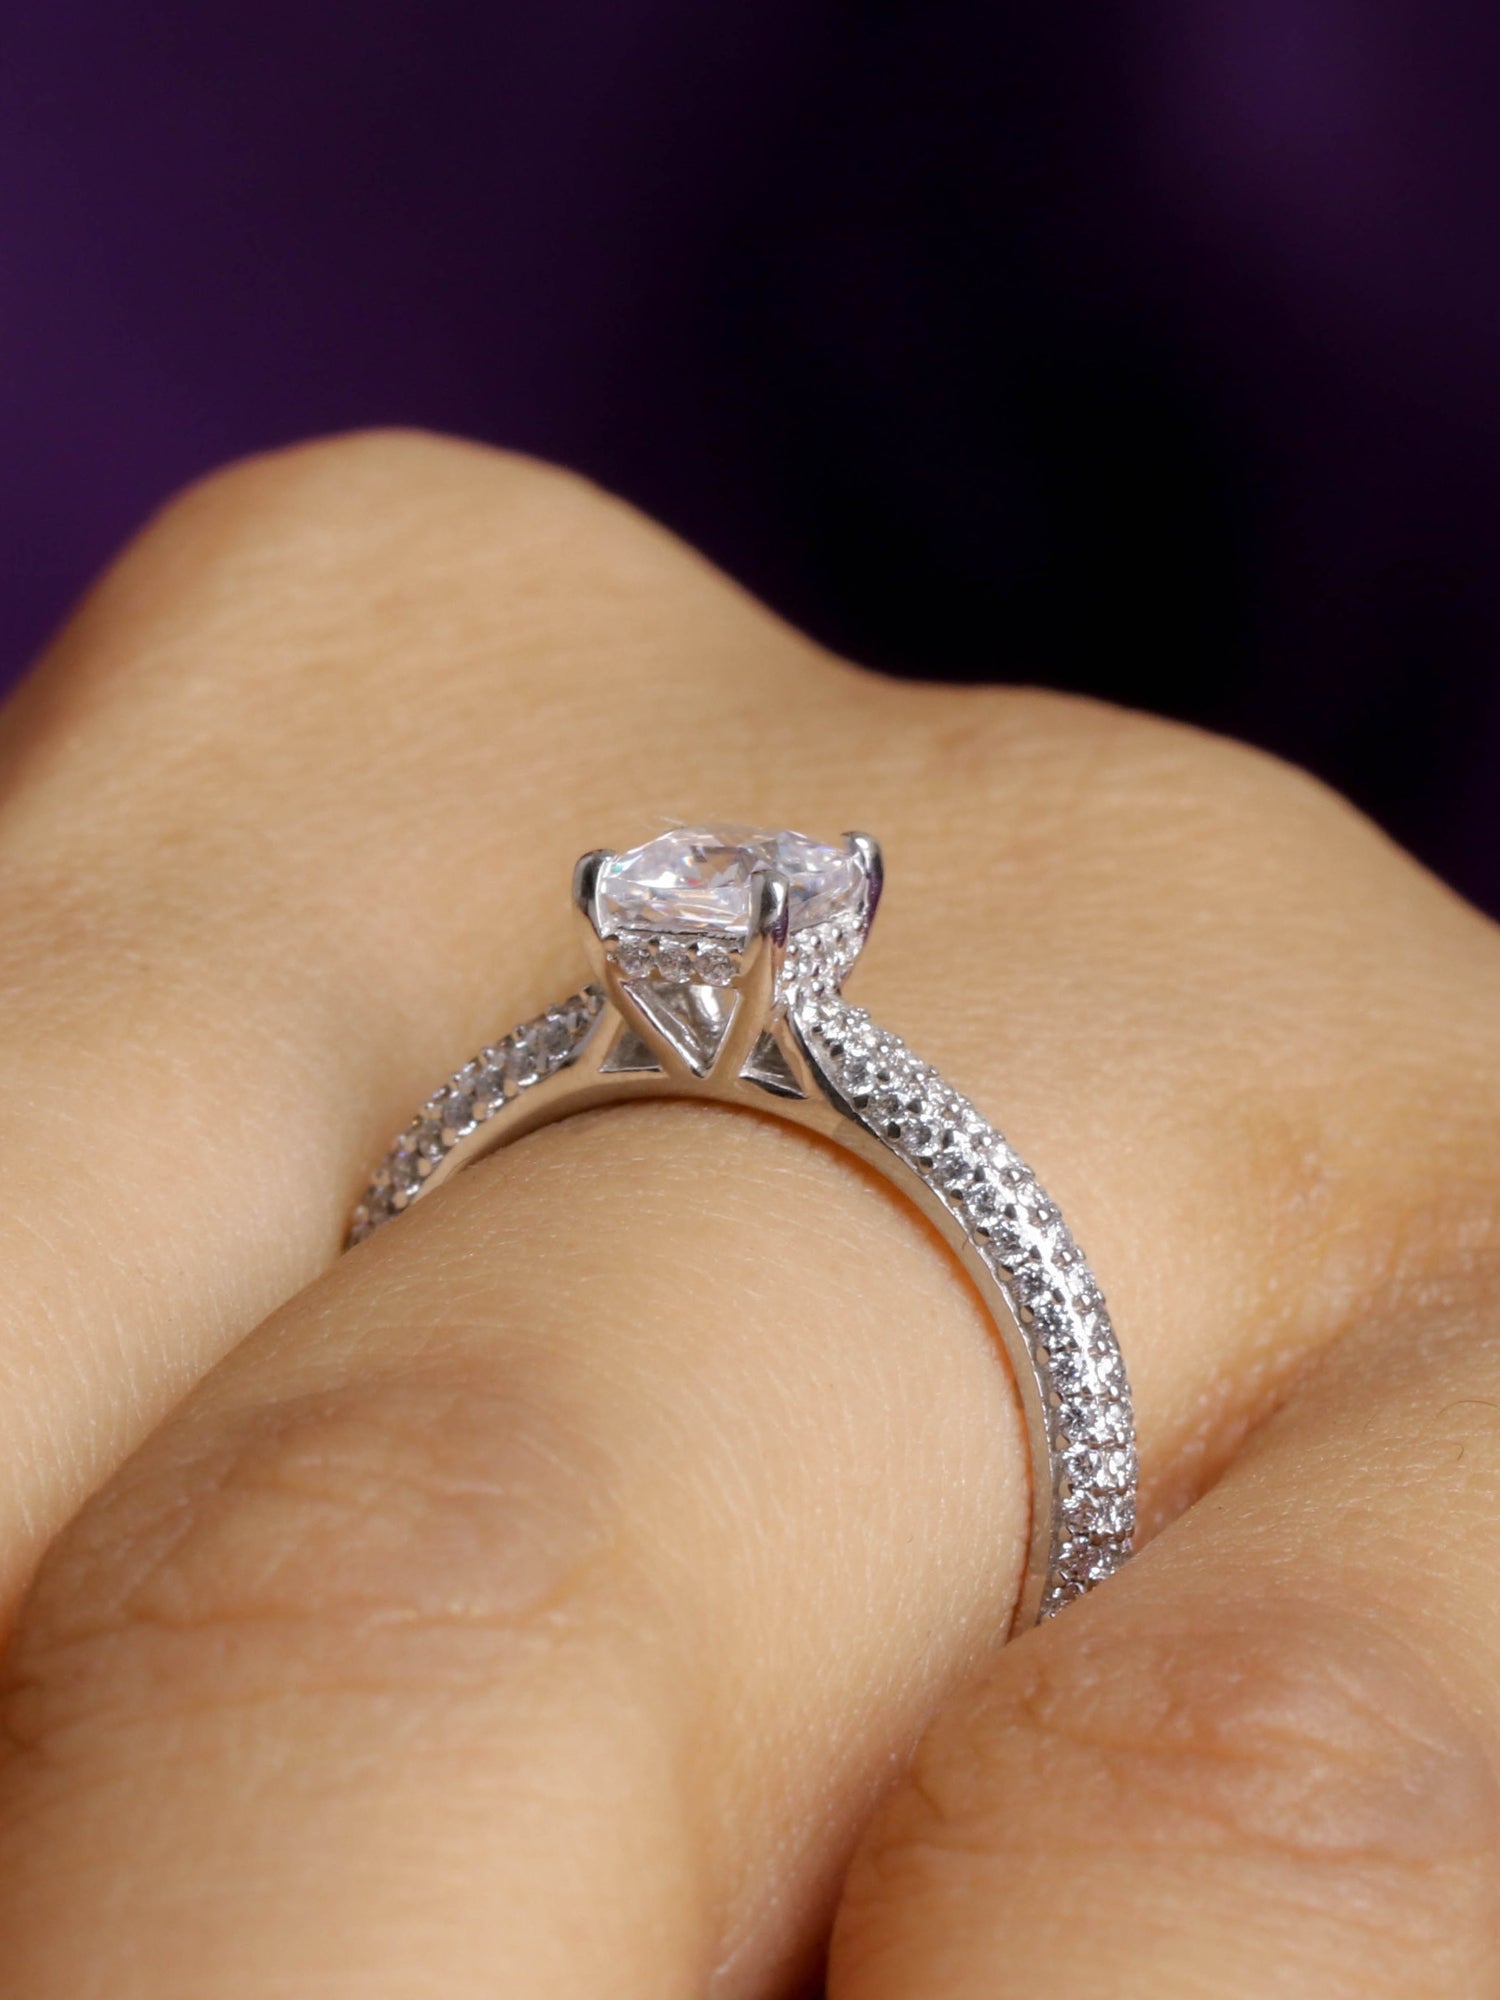 Buy Heart Engagement Ring For Women Online. Manufacturer Prices!